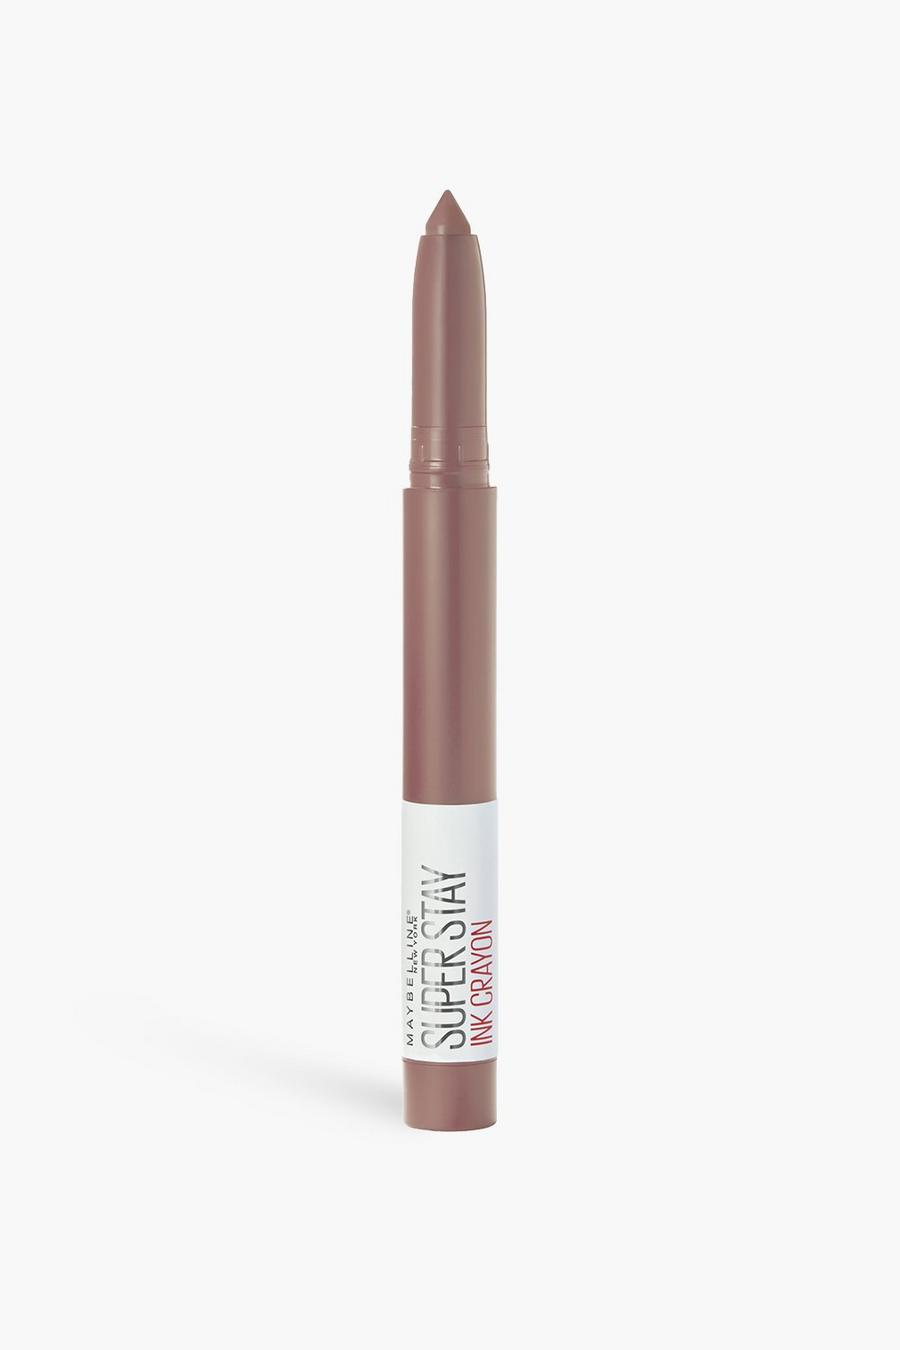 10 trust your gut Maybelline Superstay Matte Crayon Lipstick  image number 1